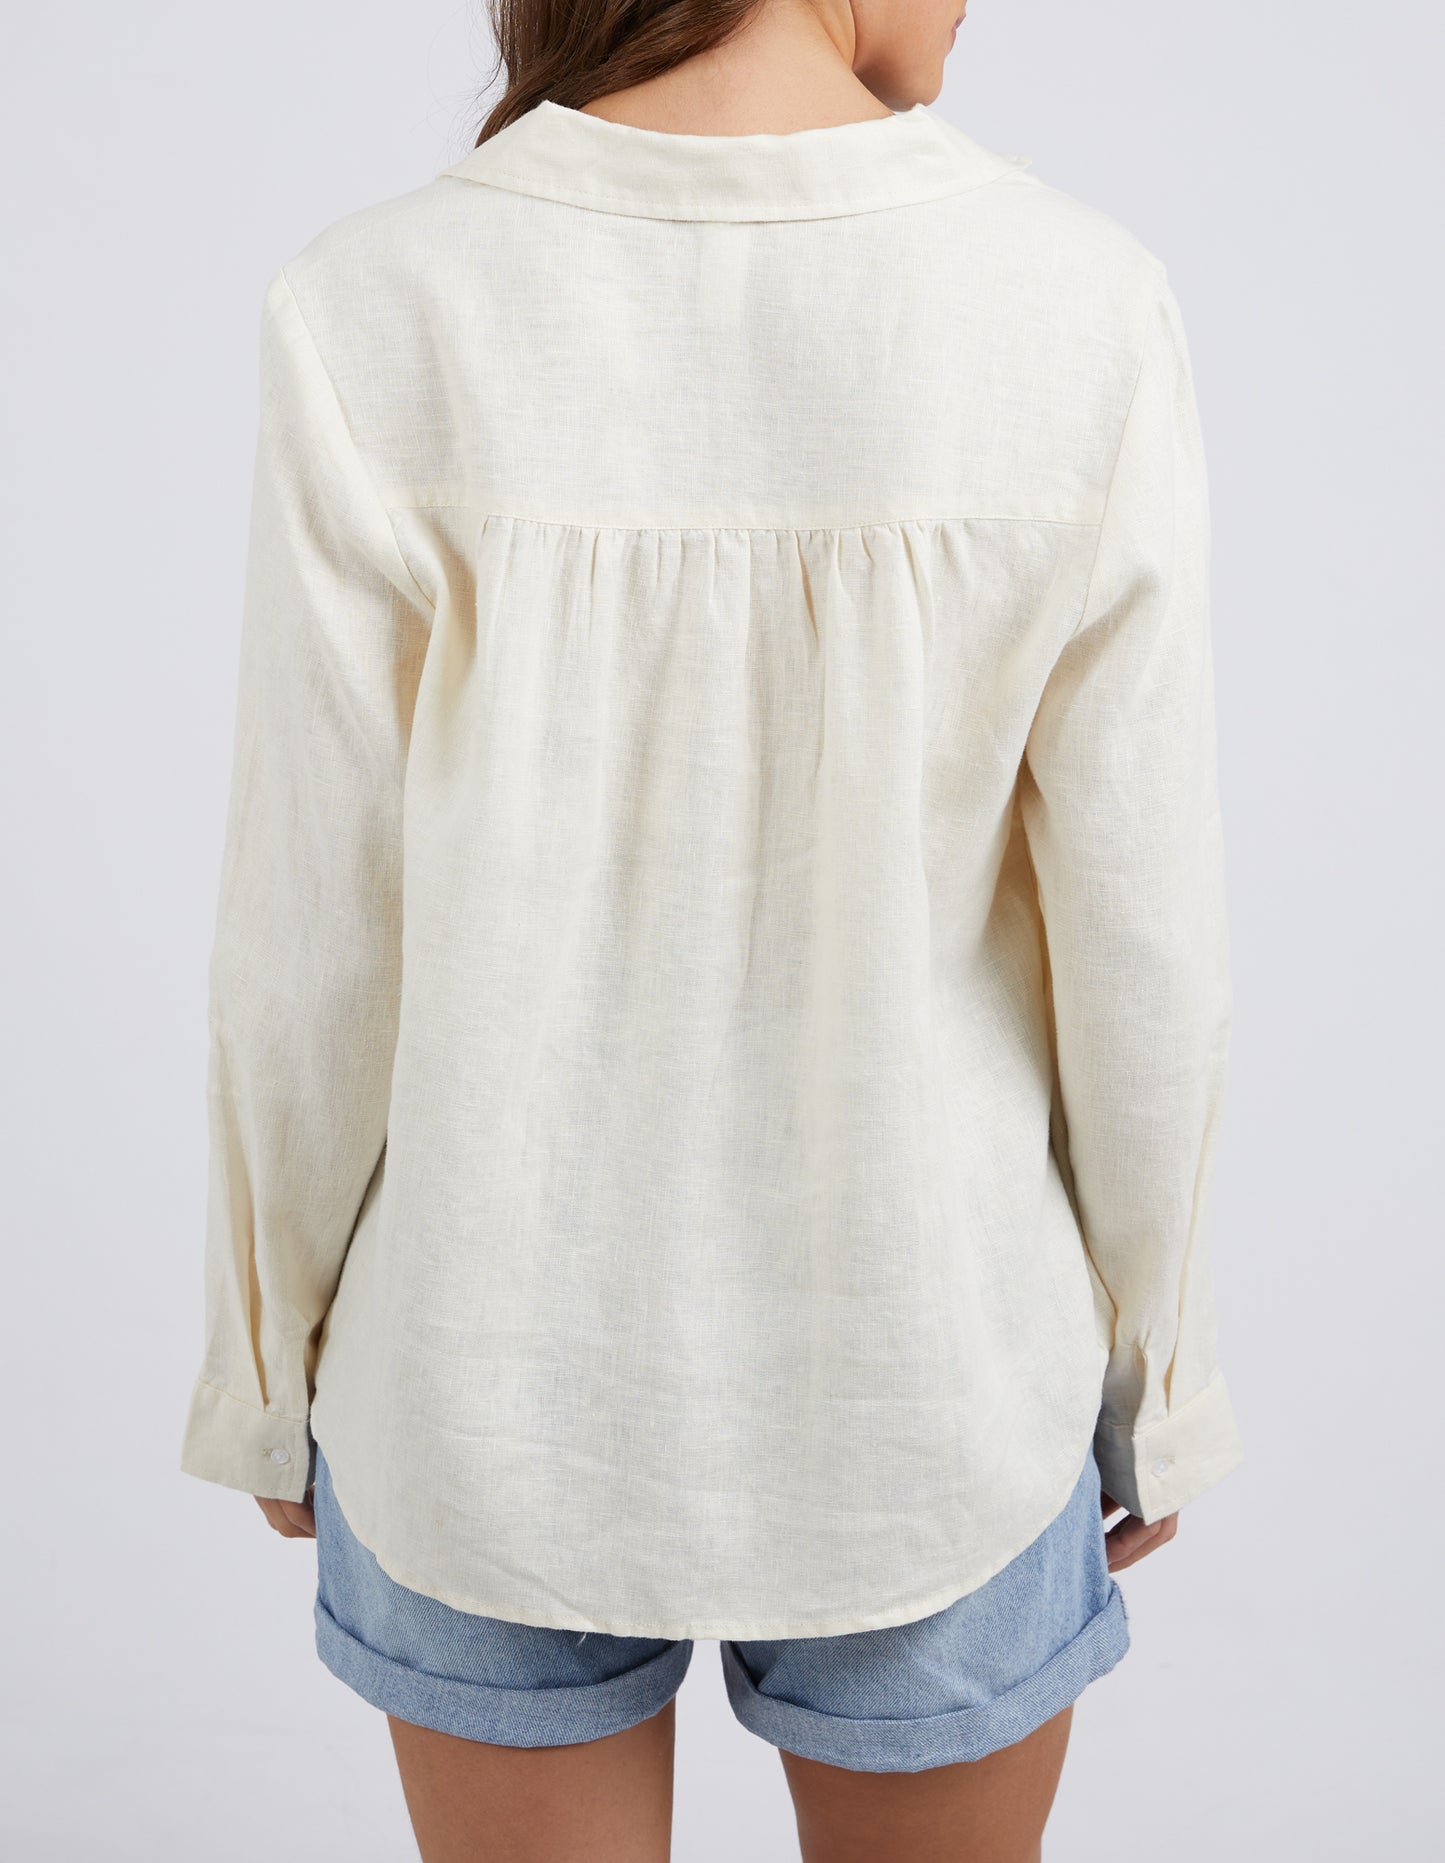 Blair Open Neck Shirt - Toasted Coconut - Elm Lifestyle